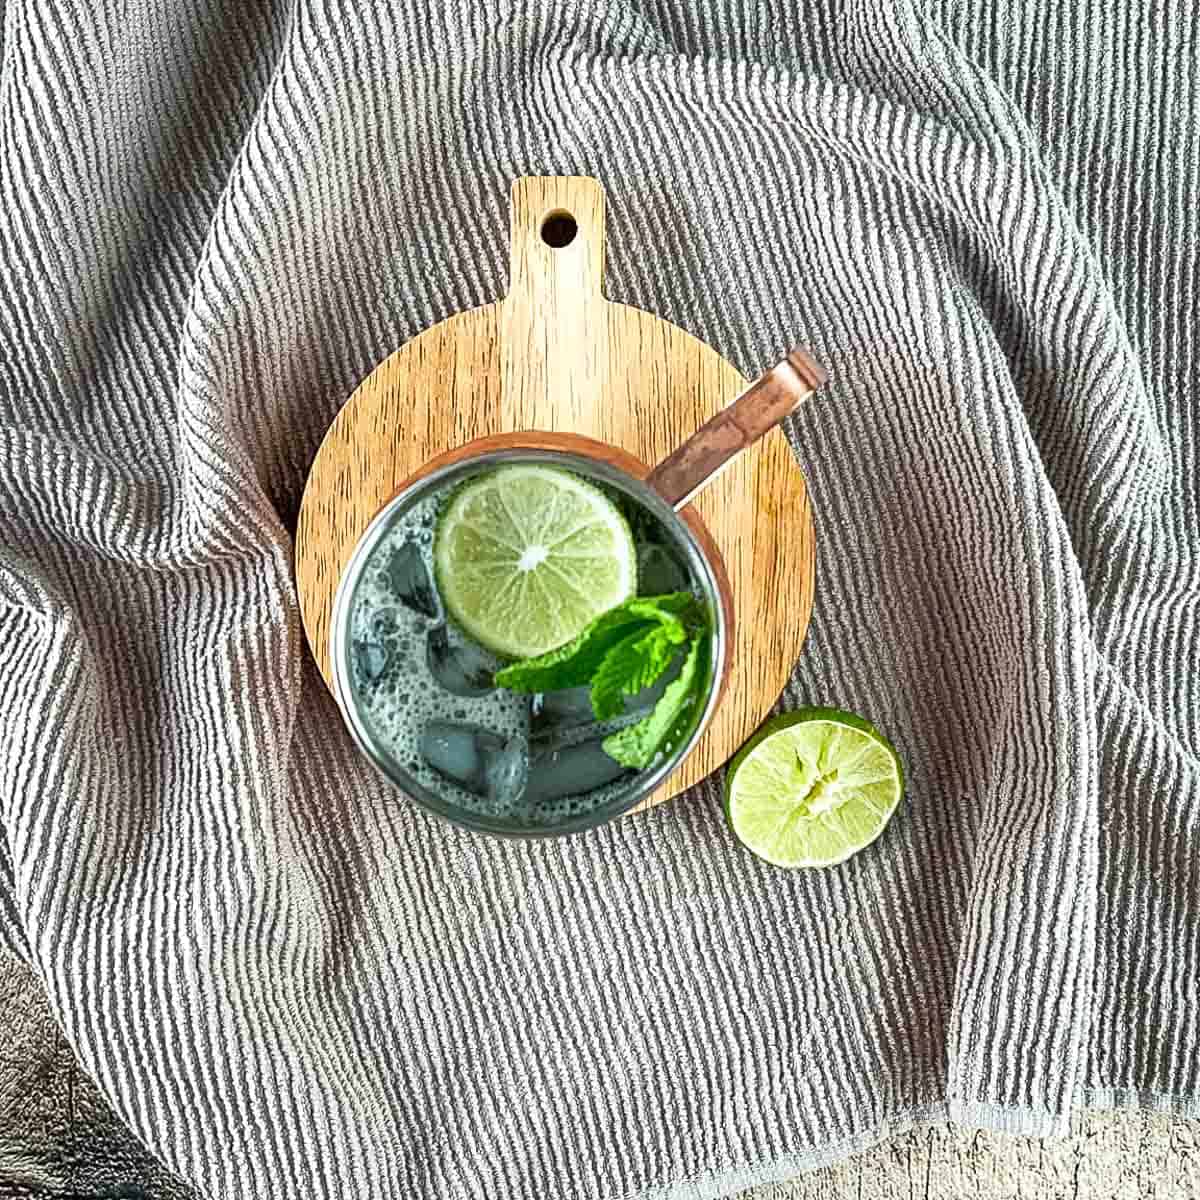 The moscow mule with white rum in a copper mug garnished with fresh mint and a lime wheel.